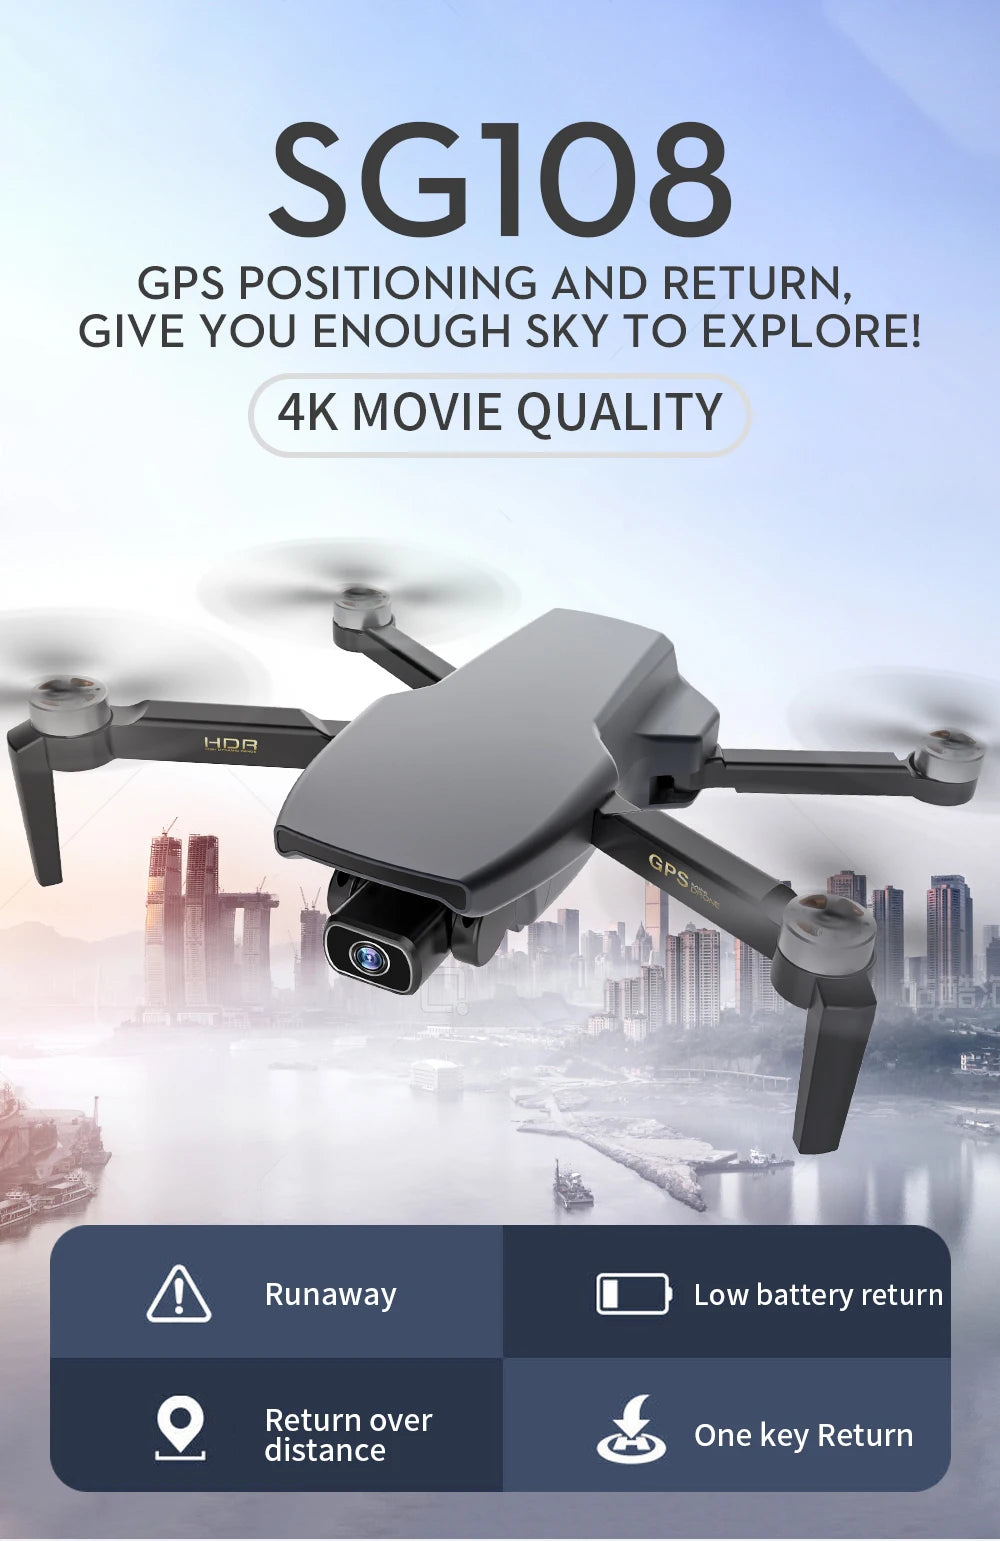 ZLRC SG108 Drone, SGIO8 GPS POSITIONING AND RETURN, GIVE YOU EN